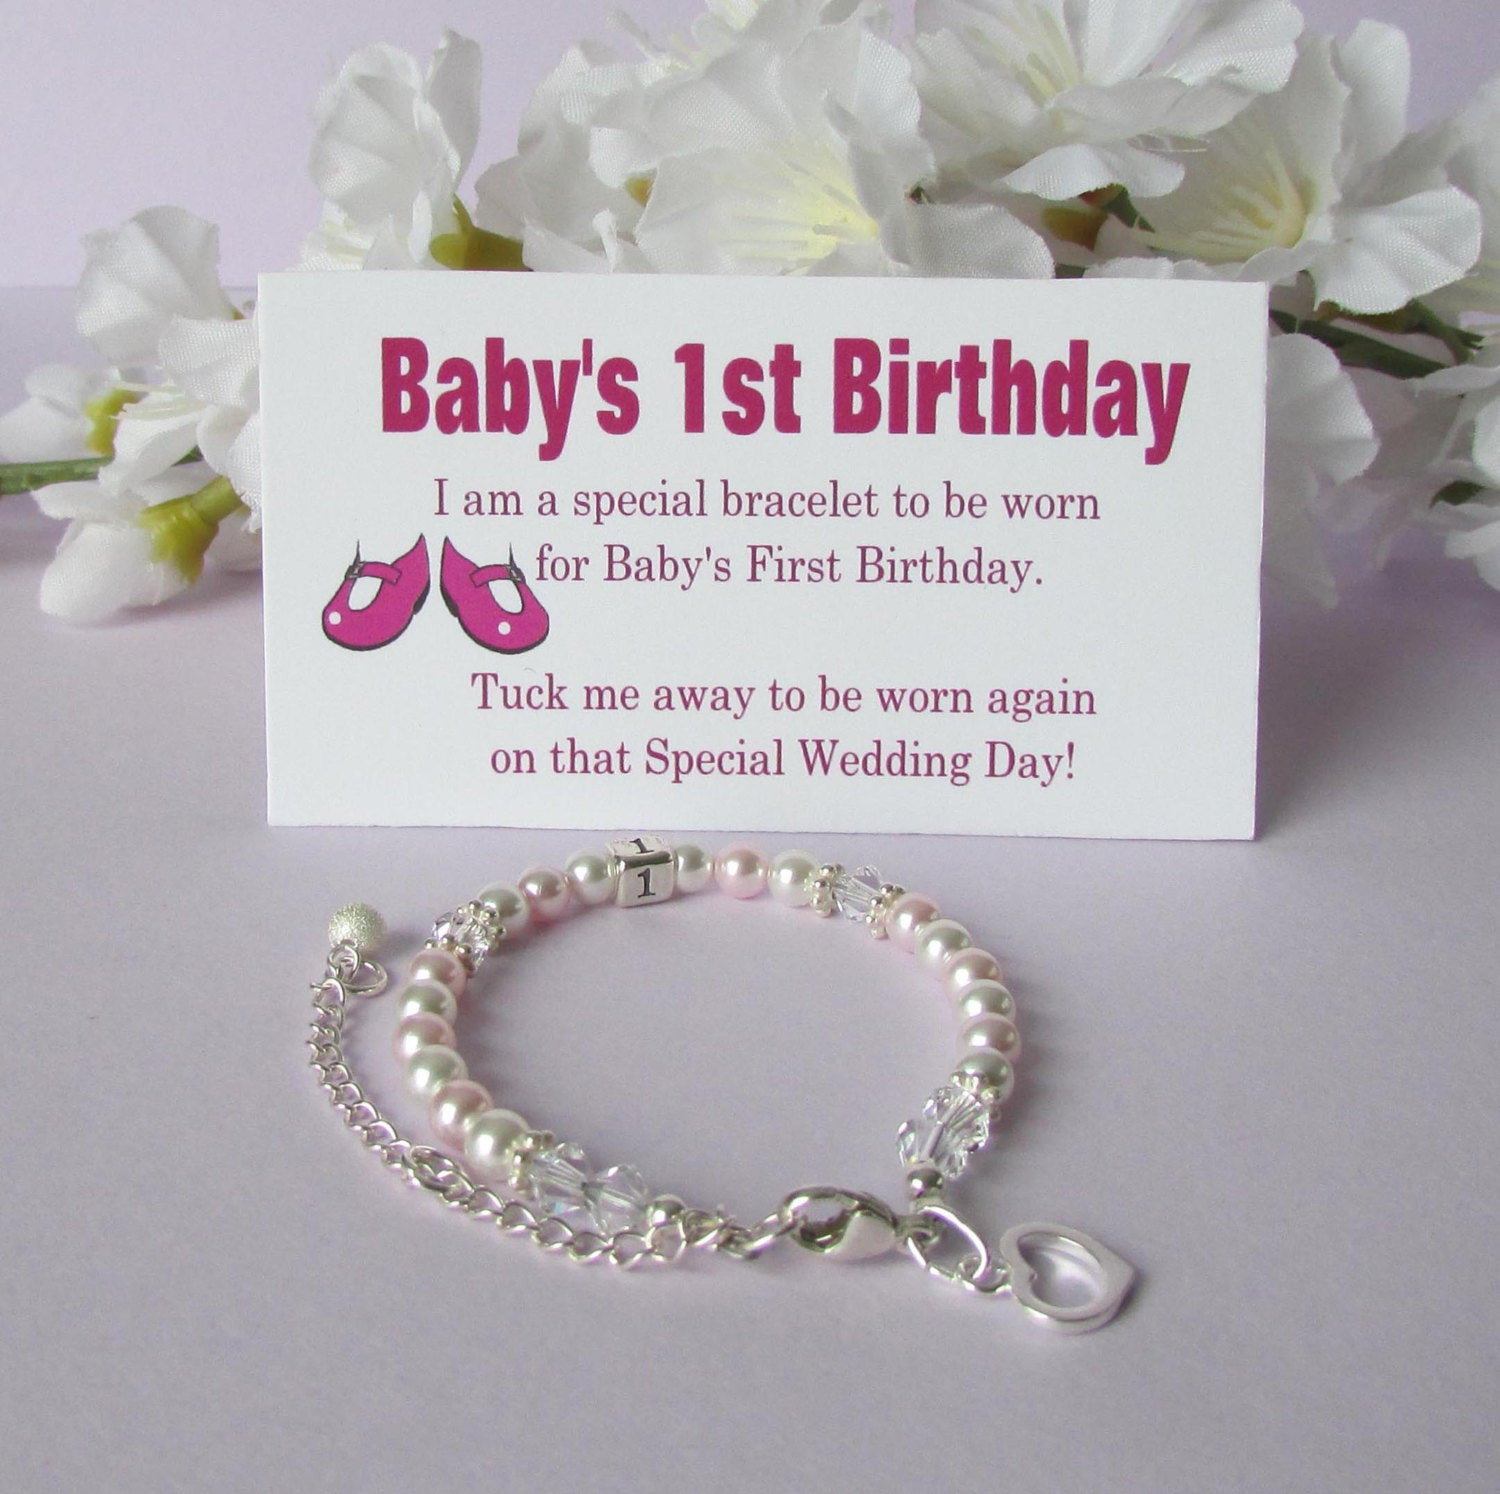 1st Birthday Gifts For Girl
 Baby s 1st Birthday Gift Bracelet Baby to Bride Growing